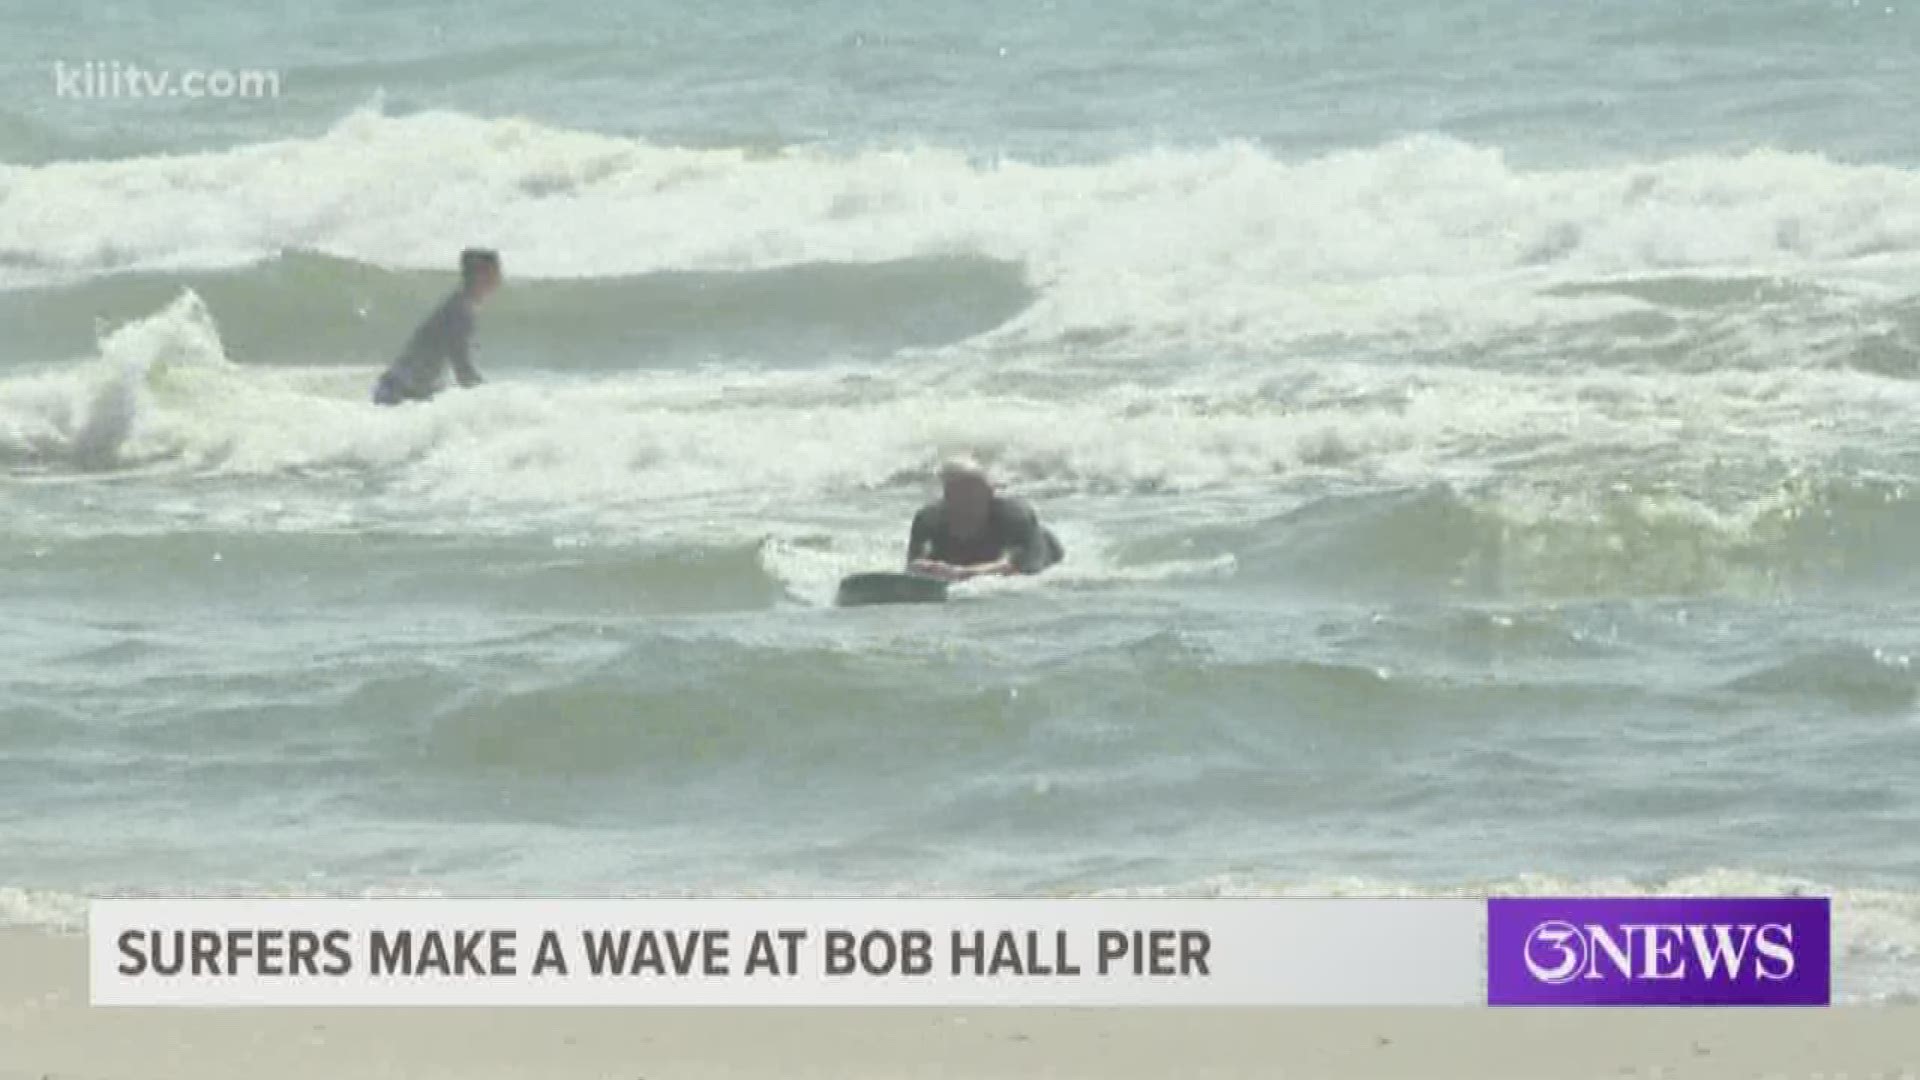 The waves near Bob Hall Pier were speckled with surfers on Sunday morning.